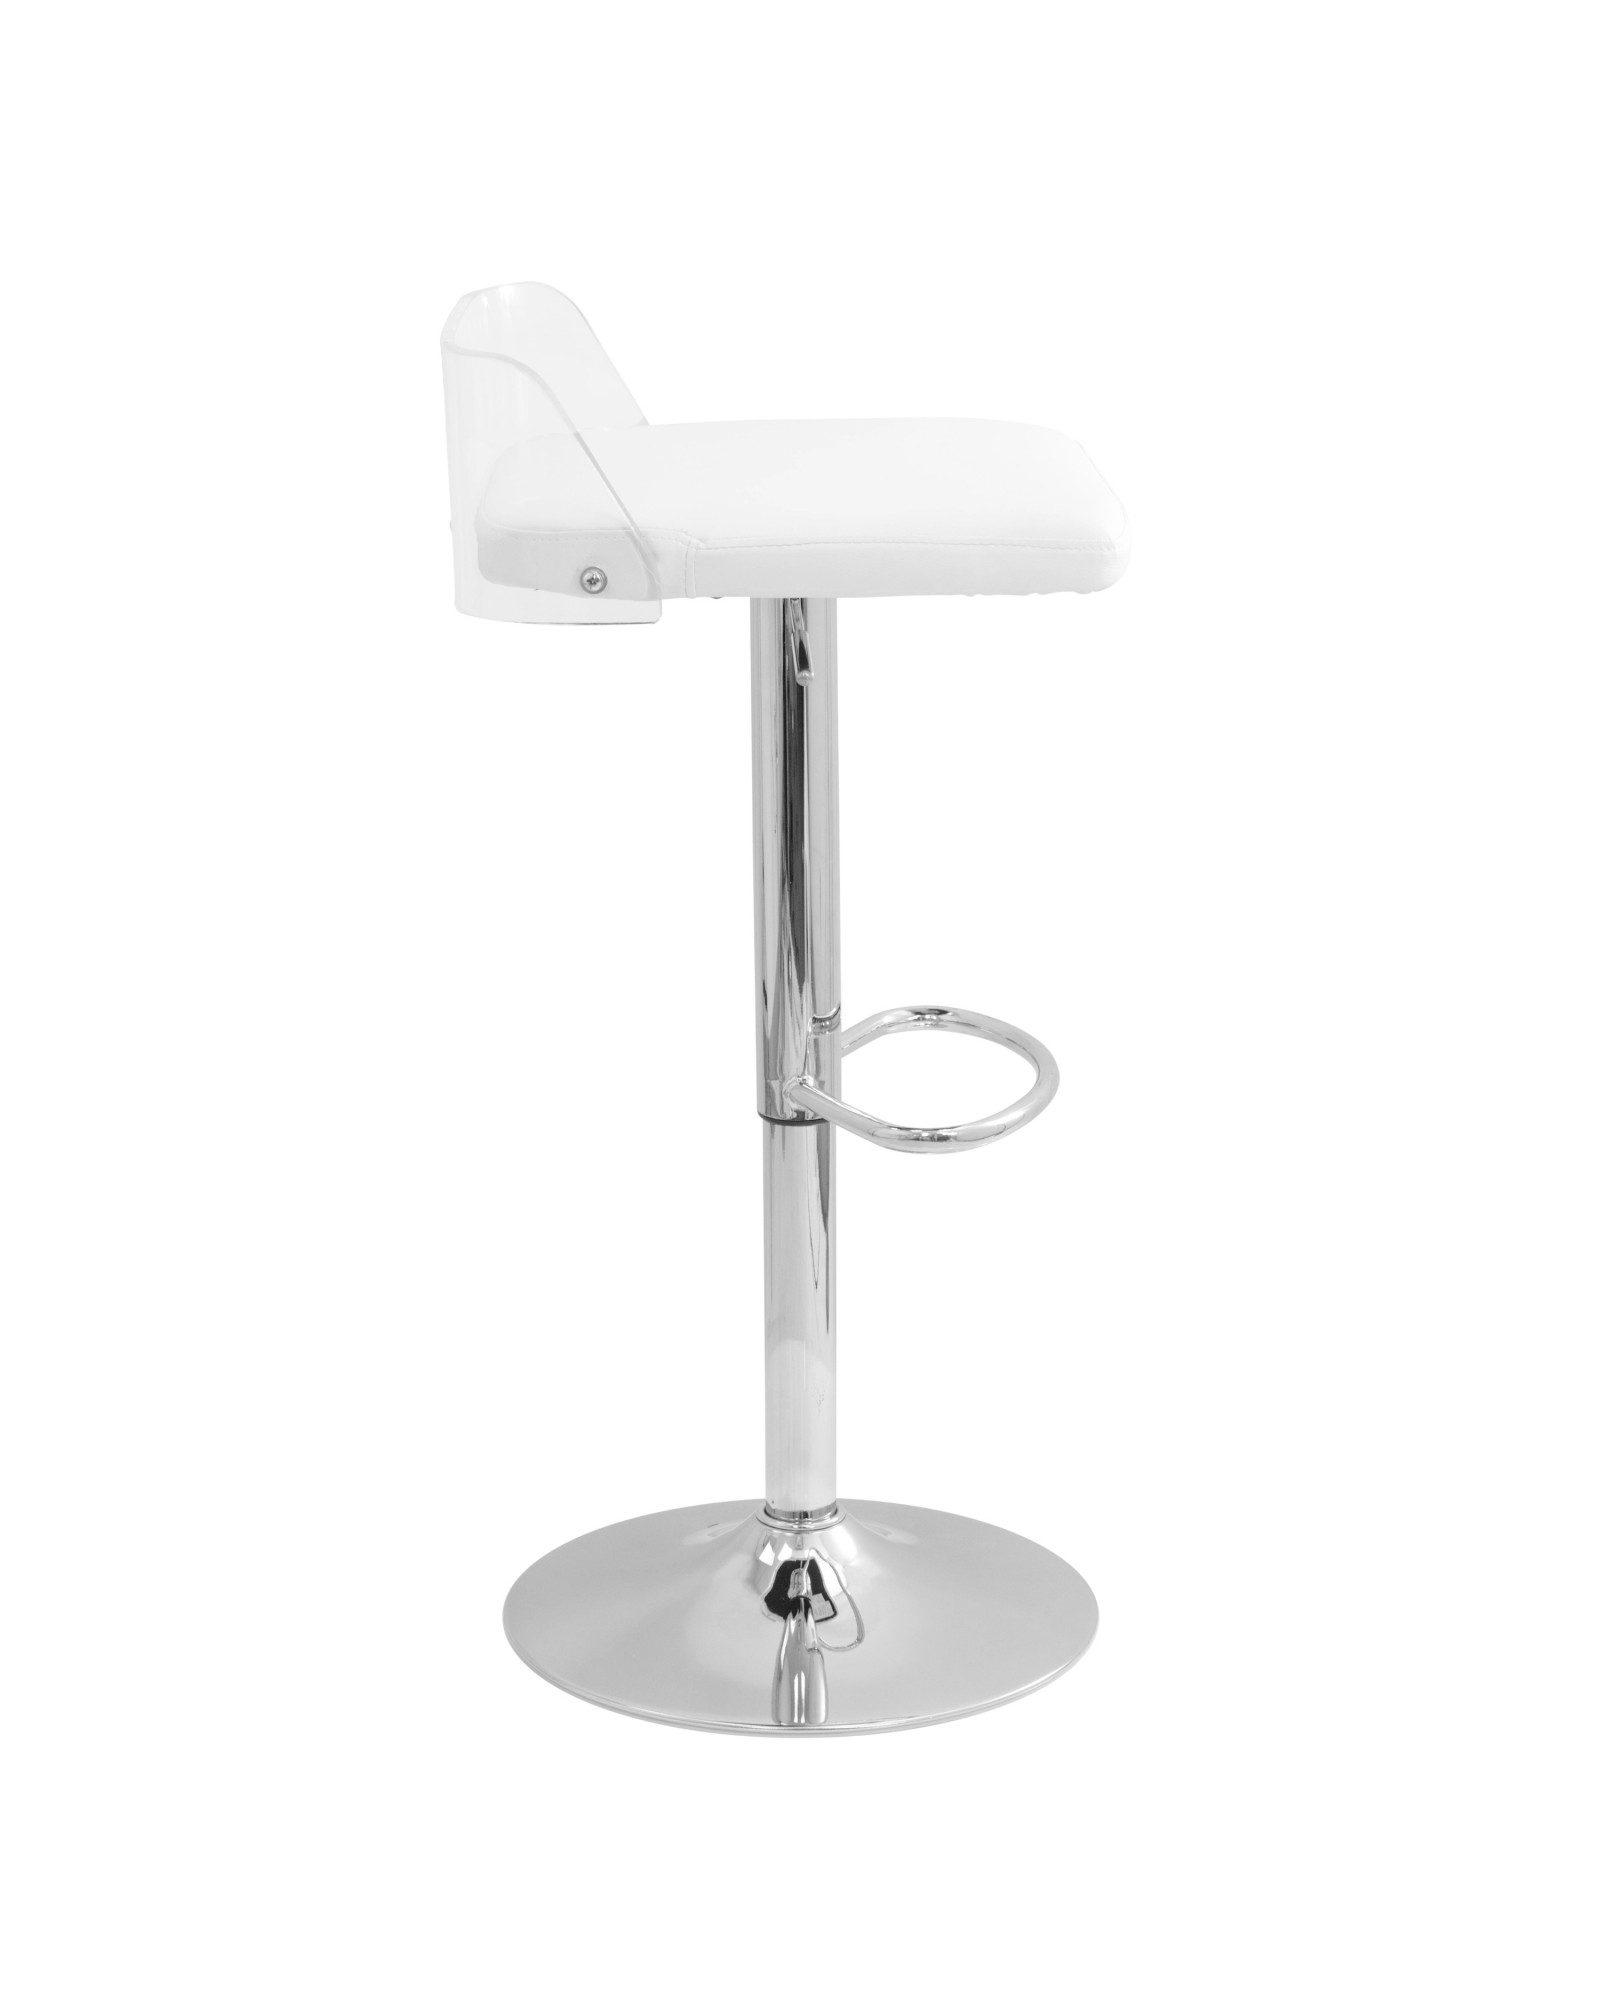 Arctic Contemporary Adjustable Barstool in Clear Acrylic and White Faux Leather